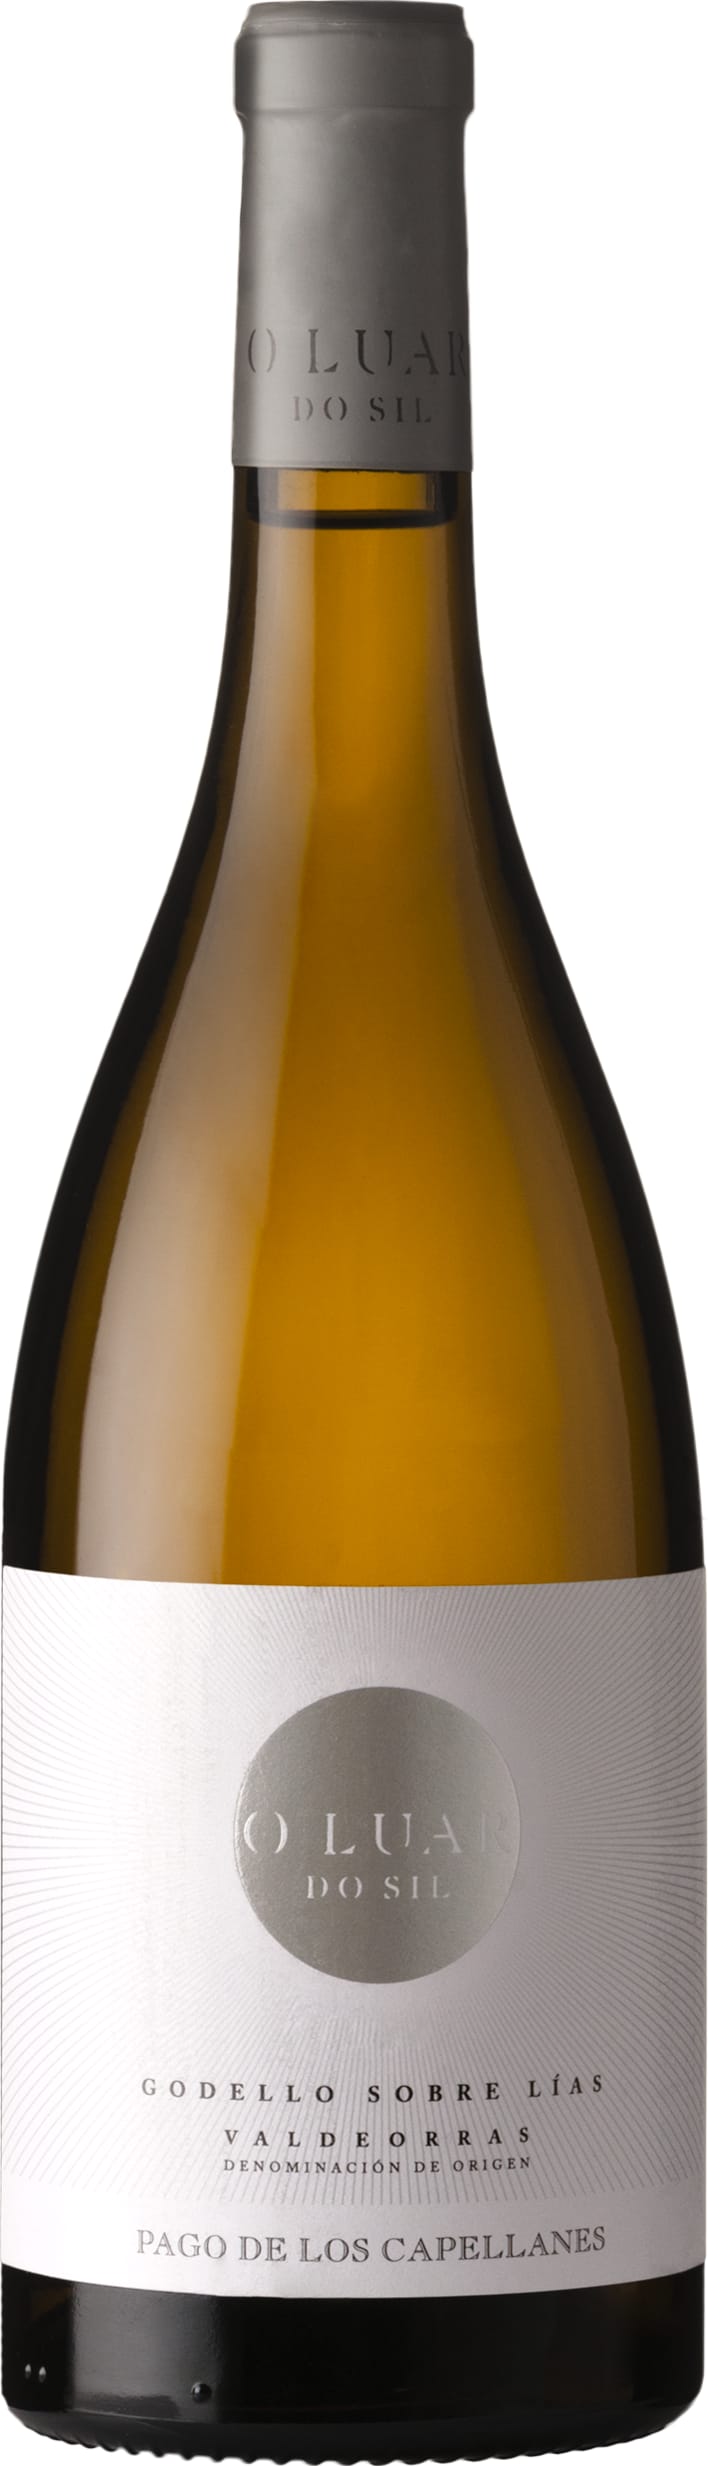 O Luar do Sil Godello Sobre Lias 2022 75cl - Buy O Luar do Sil Wines from GREAT WINES DIRECT wine shop